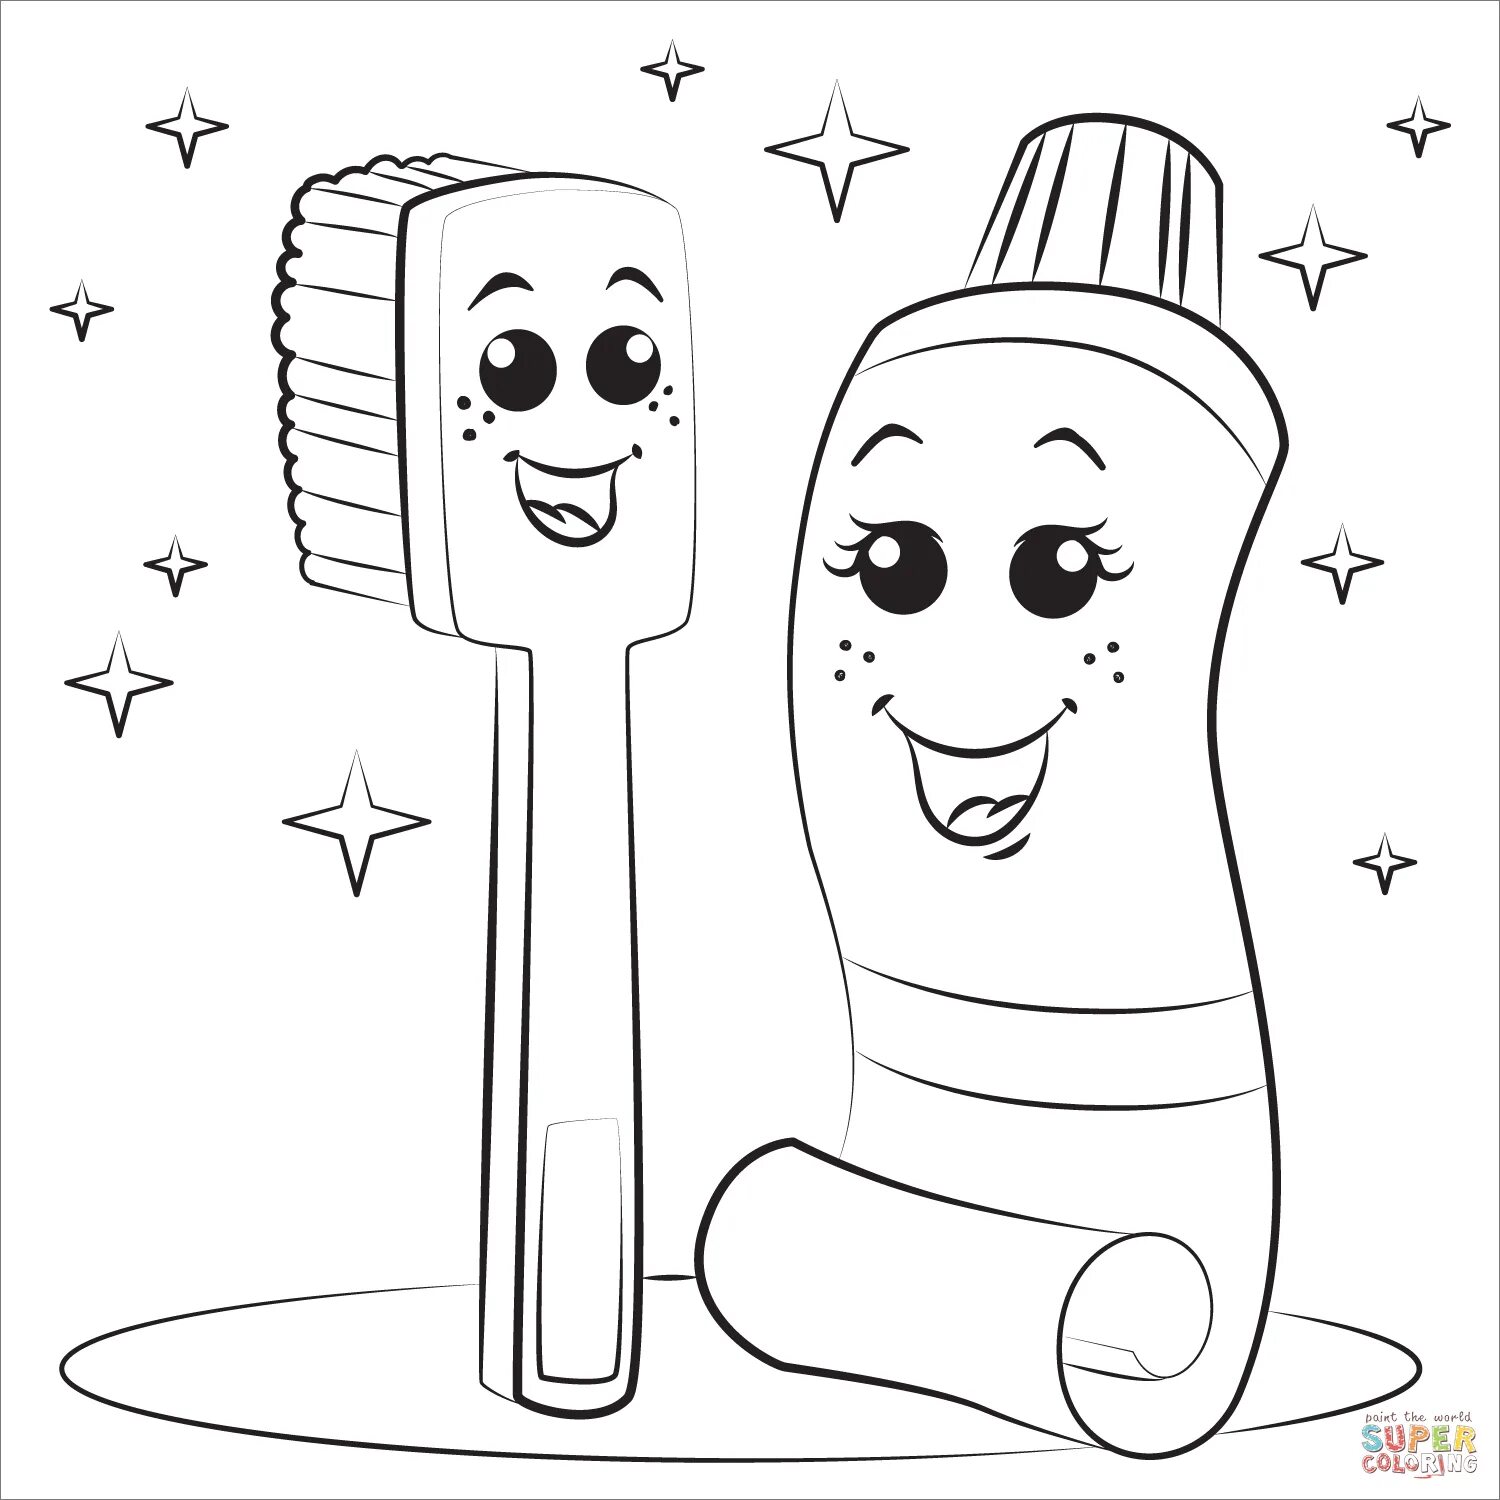 Children's toothbrush and paste #19